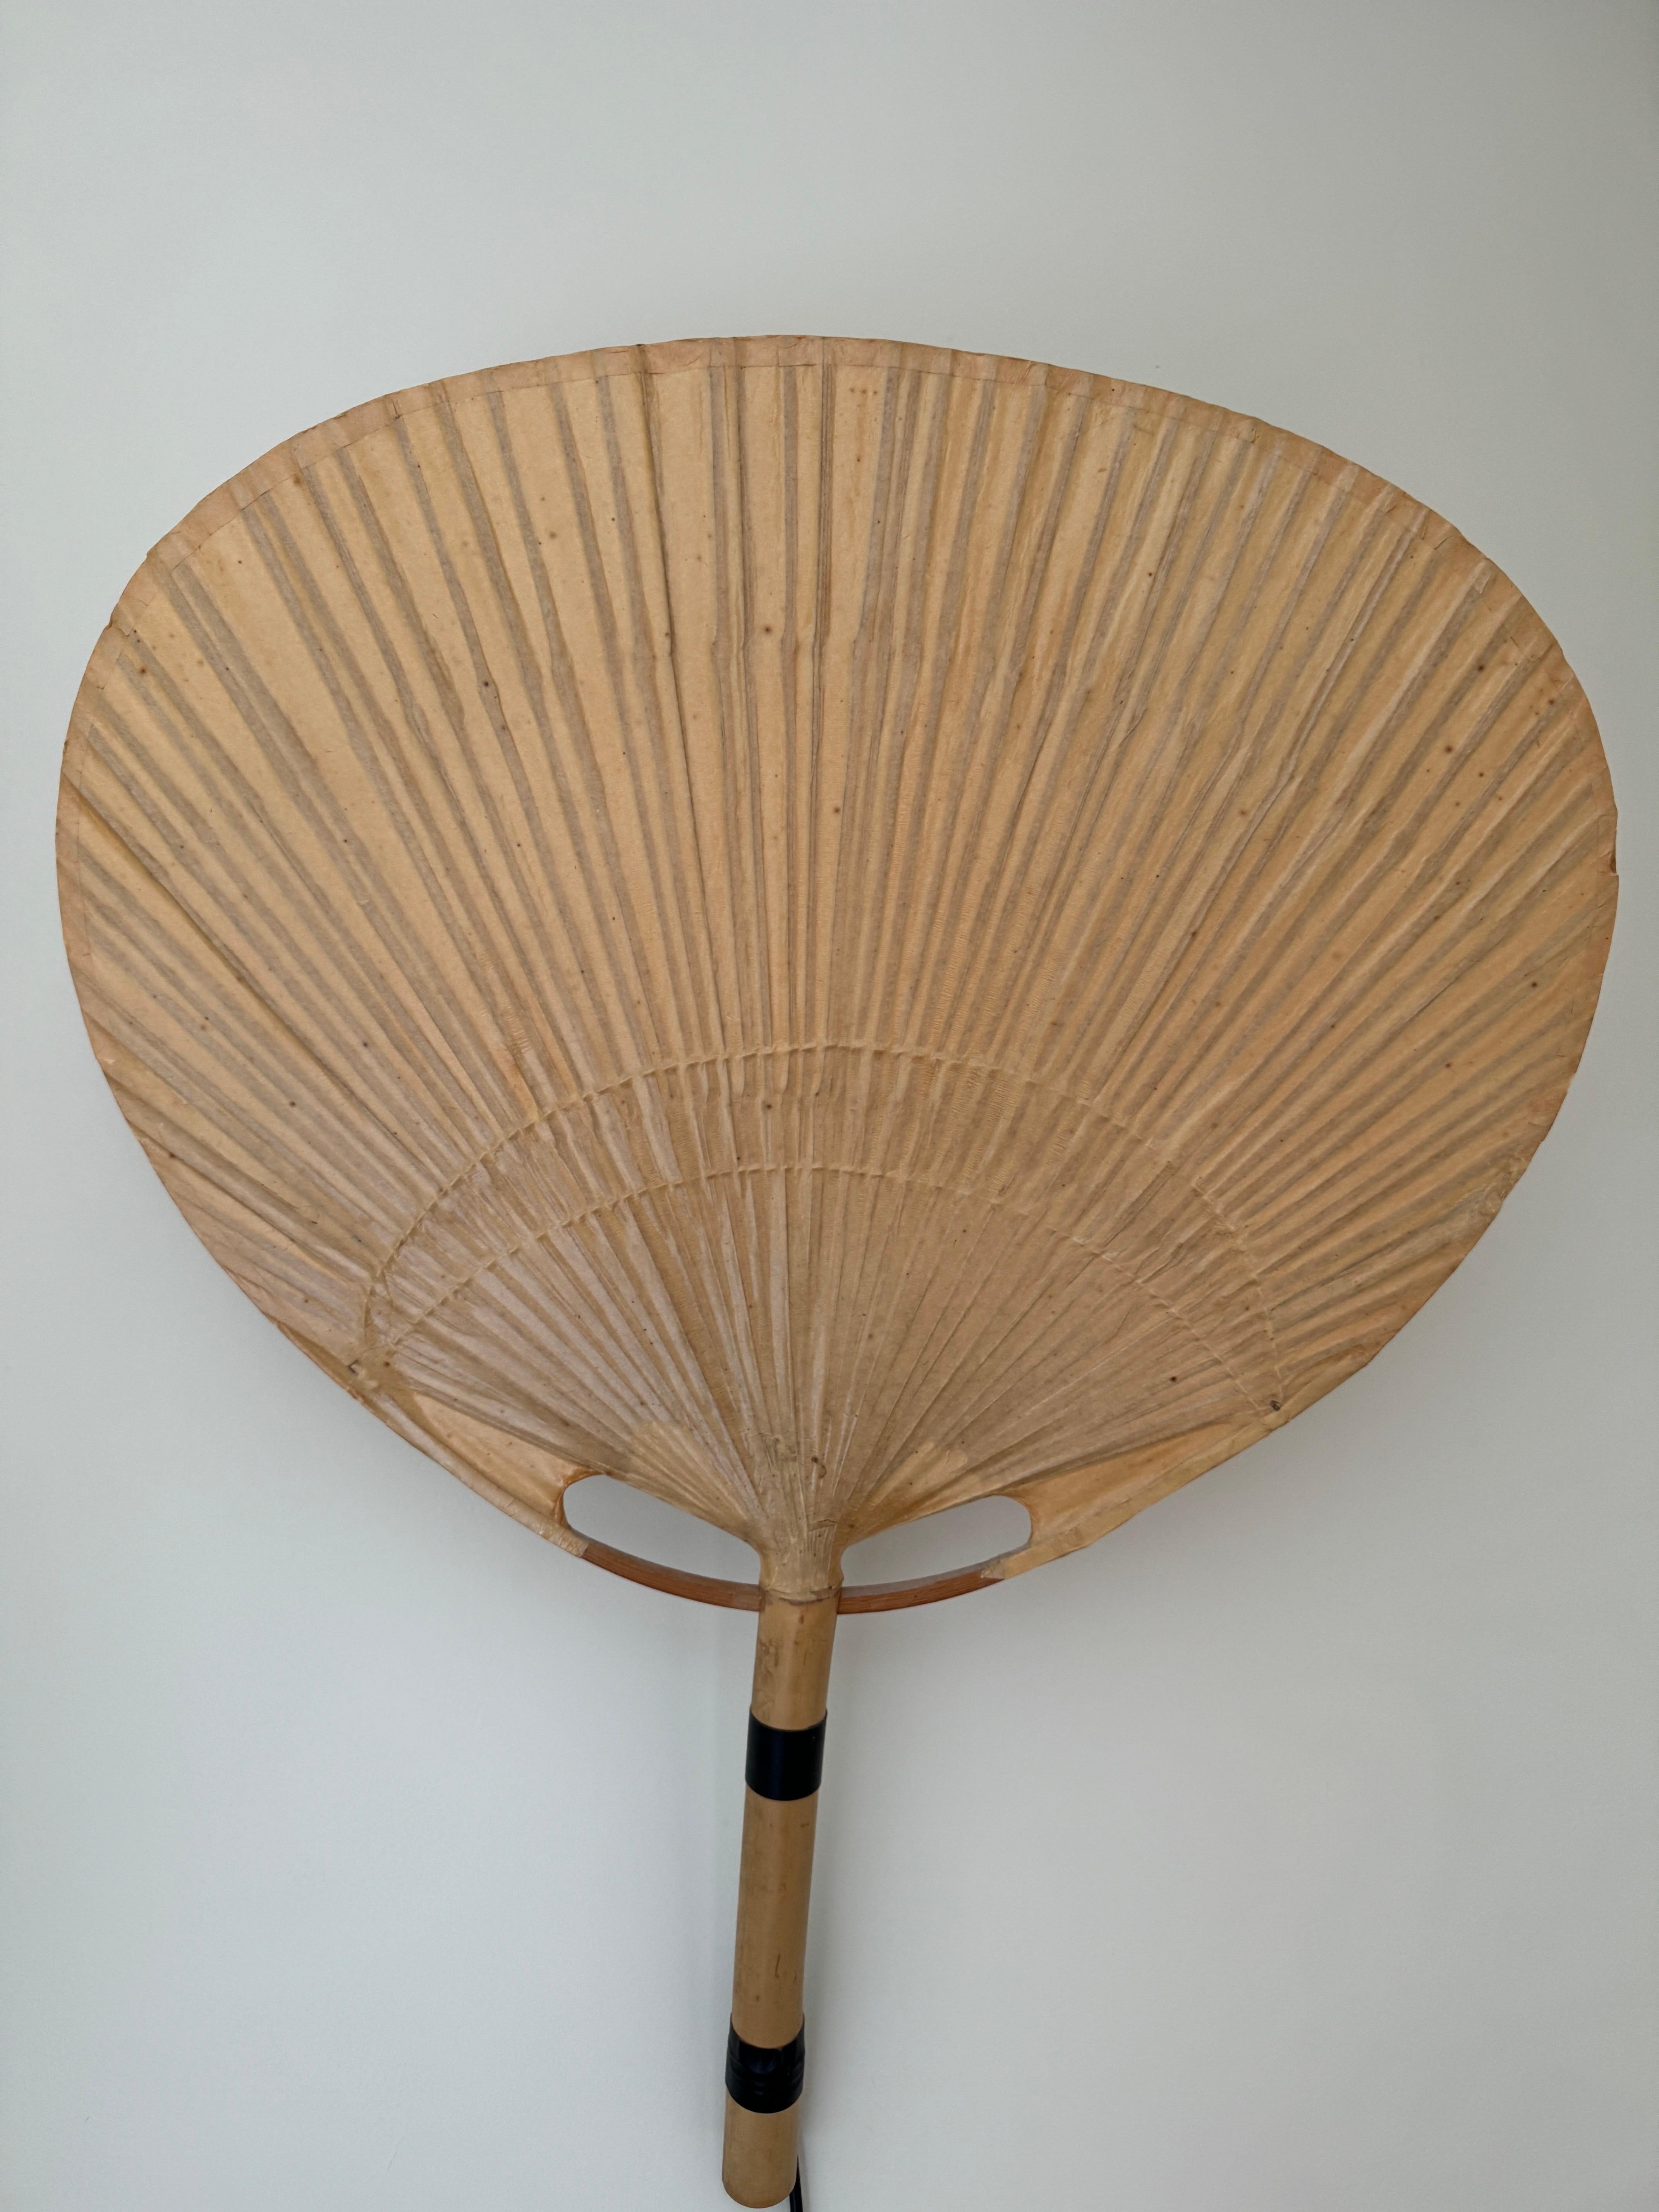 An extremely rare pair of Uchiwa III wall lamps designed by Ingo Maurer in the 1970s and manufactured by M-Design Munich. The Uchiwa III is a medium version of the wall lights within the Uchiwa series. These wall lamps are comprised of bamboo and